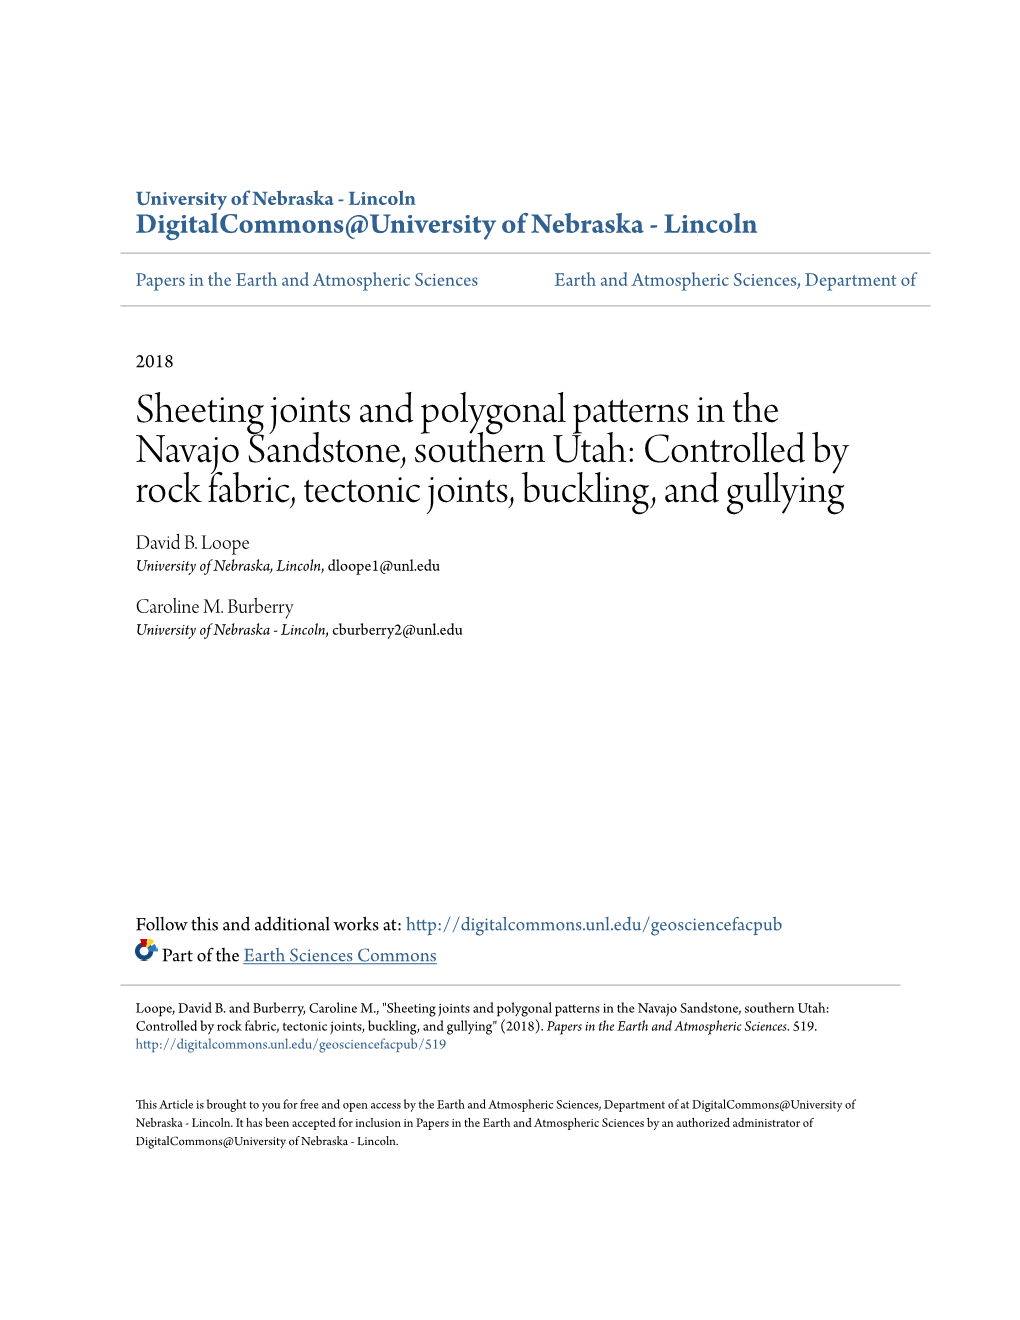 Sheeting Joints and Polygonal Patterns in the Navajo Sandstone, Southern Utah: Controlled by Rock Fabric, Tectonic Joints, Buckling, and Gullying David B